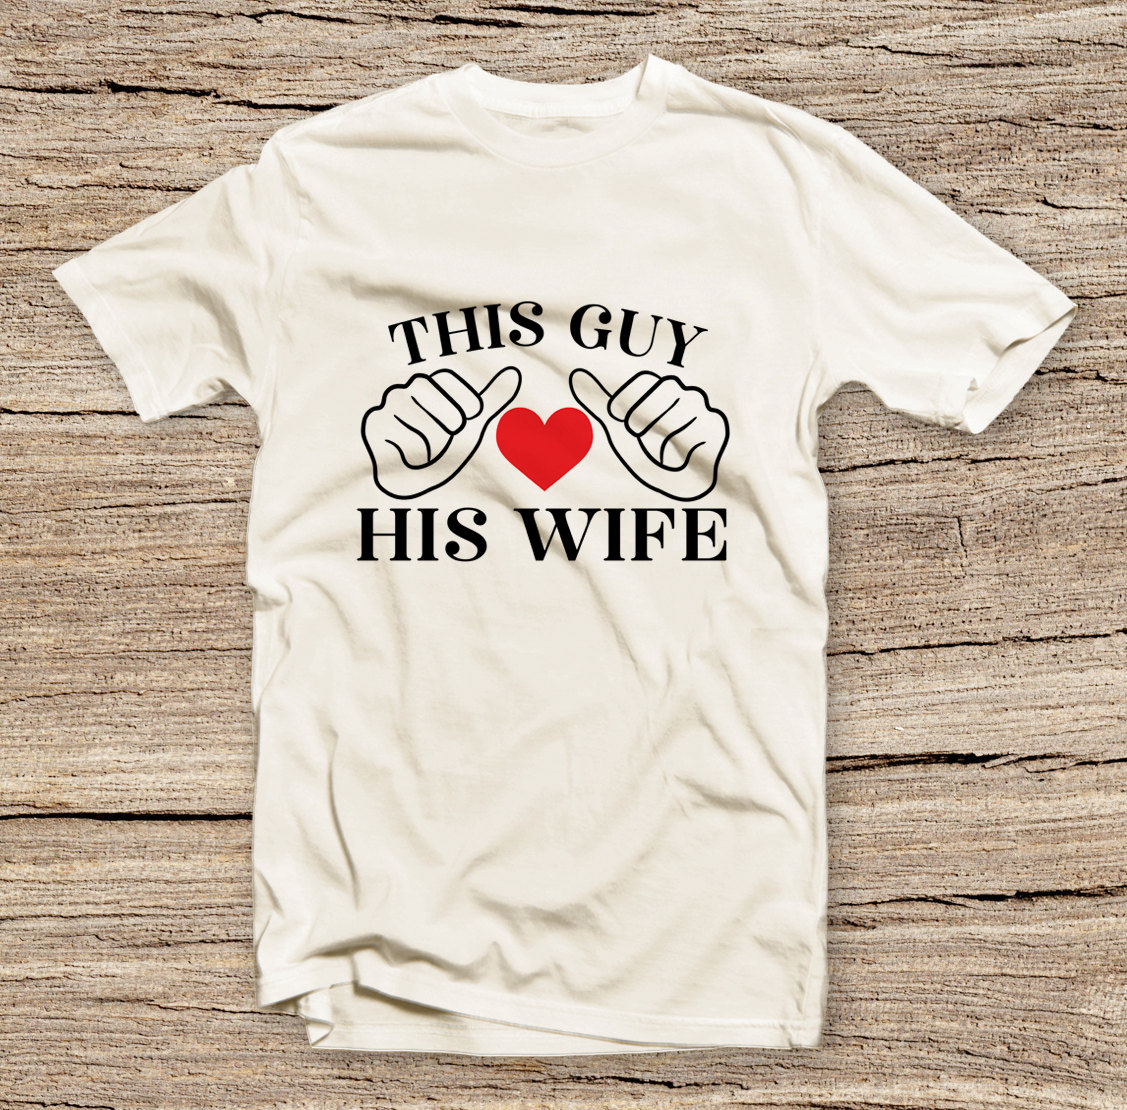 Pts-114 This Guy Loves His Wife Mens T-shirt, Couple T-shirt, Wedding T-shirt, Style T-shirt, Fashion Printed T-shirt